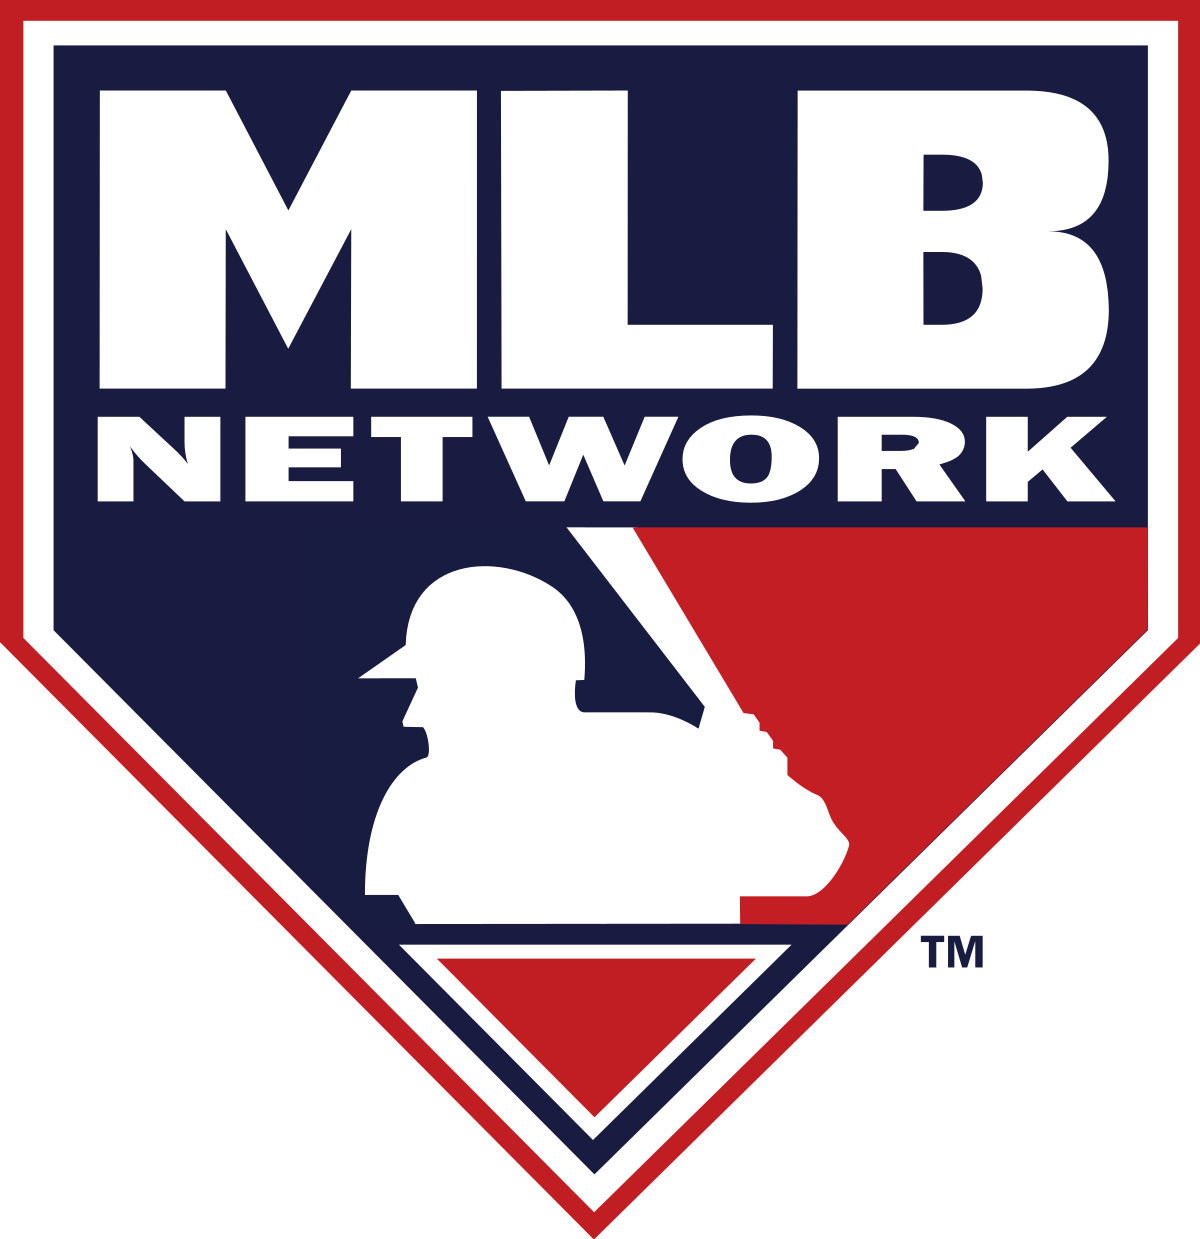 Watch classic MLB games for free